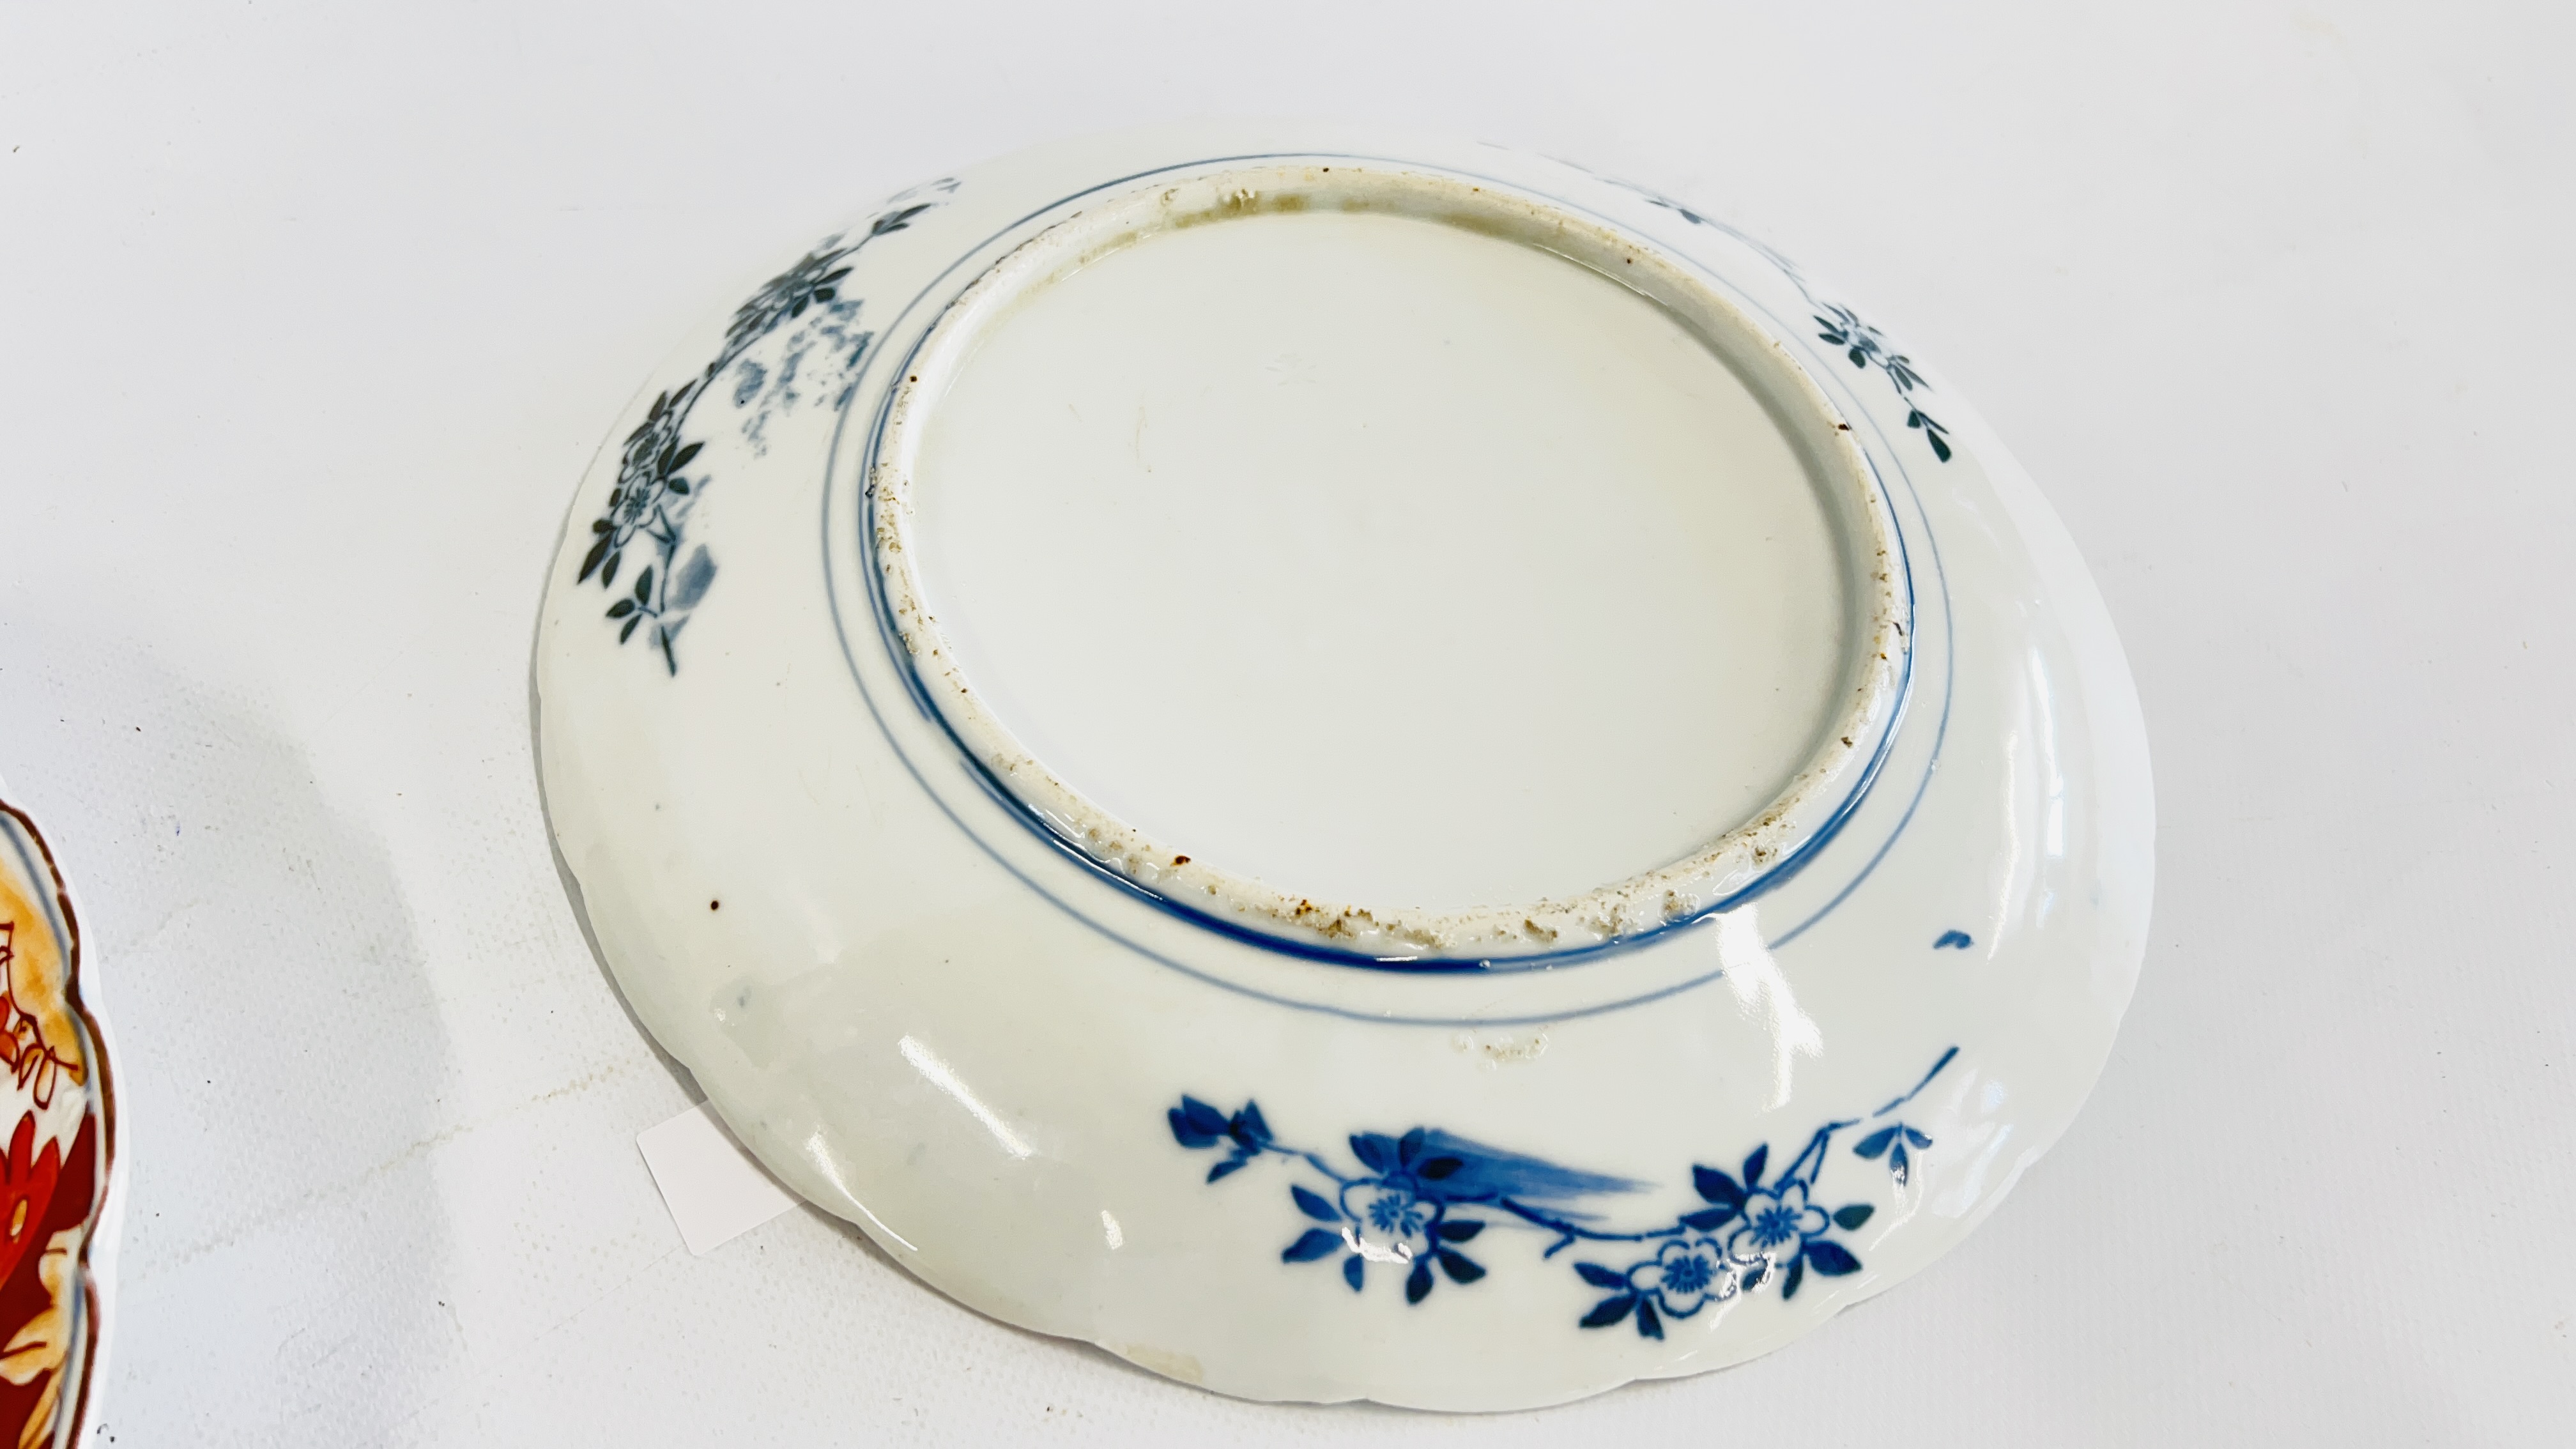 A PAIR OF VINTAGE IMARI PATTERN PLATES - DIAM 28.5CM (RIM CHIP & HAIRLINE CRACK TO ONE EXAMPLE). - Image 4 of 6